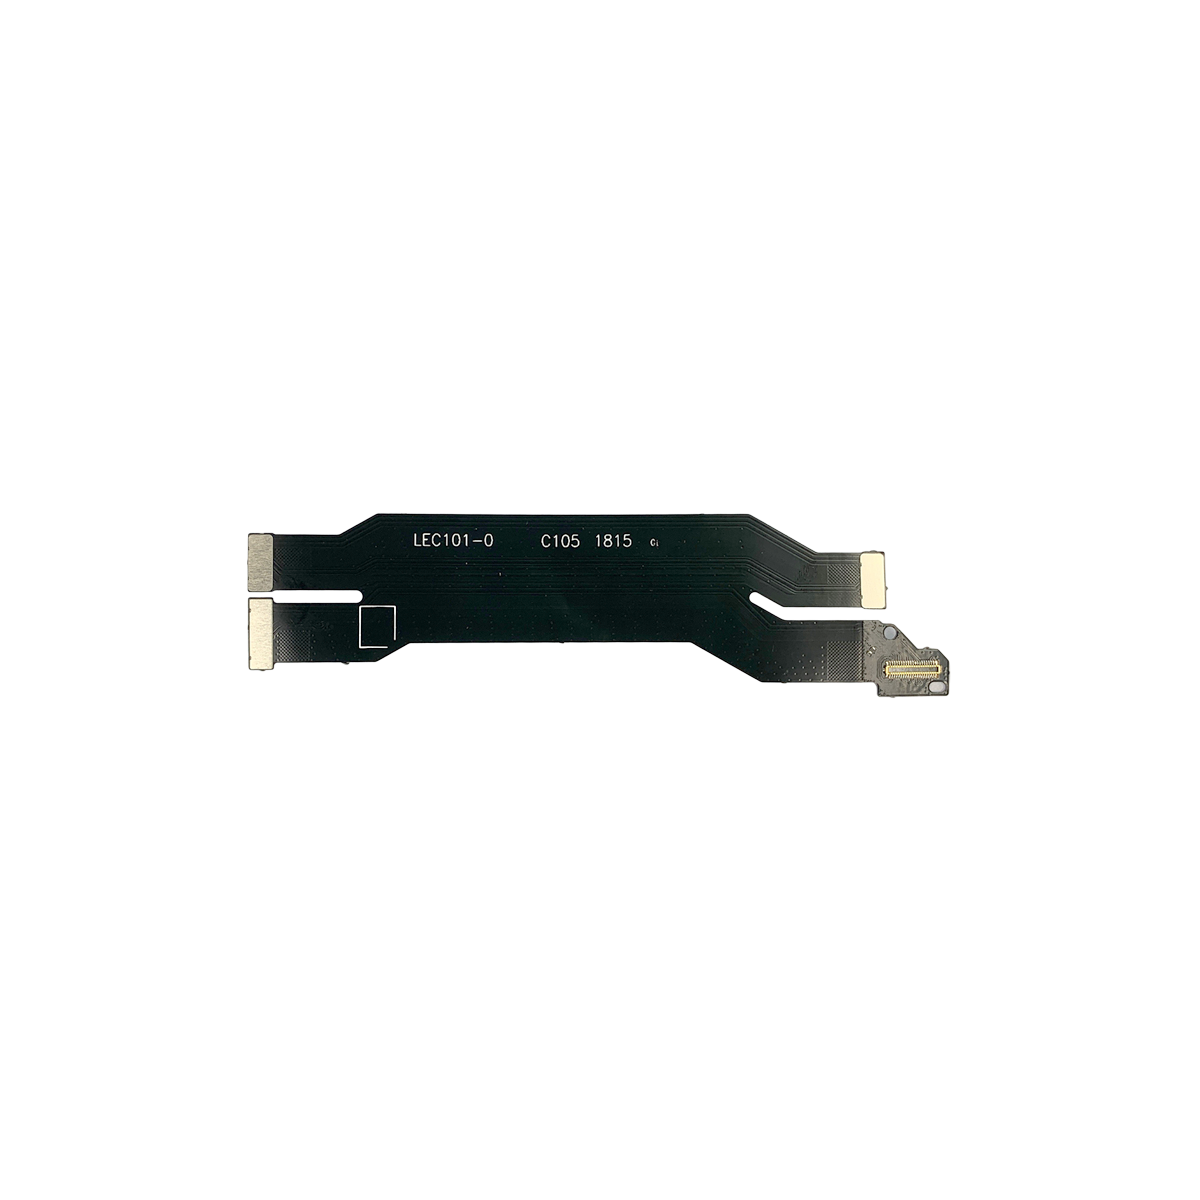 OnePlus 6 (A6000 / A6003) Motherboard Flex Cable